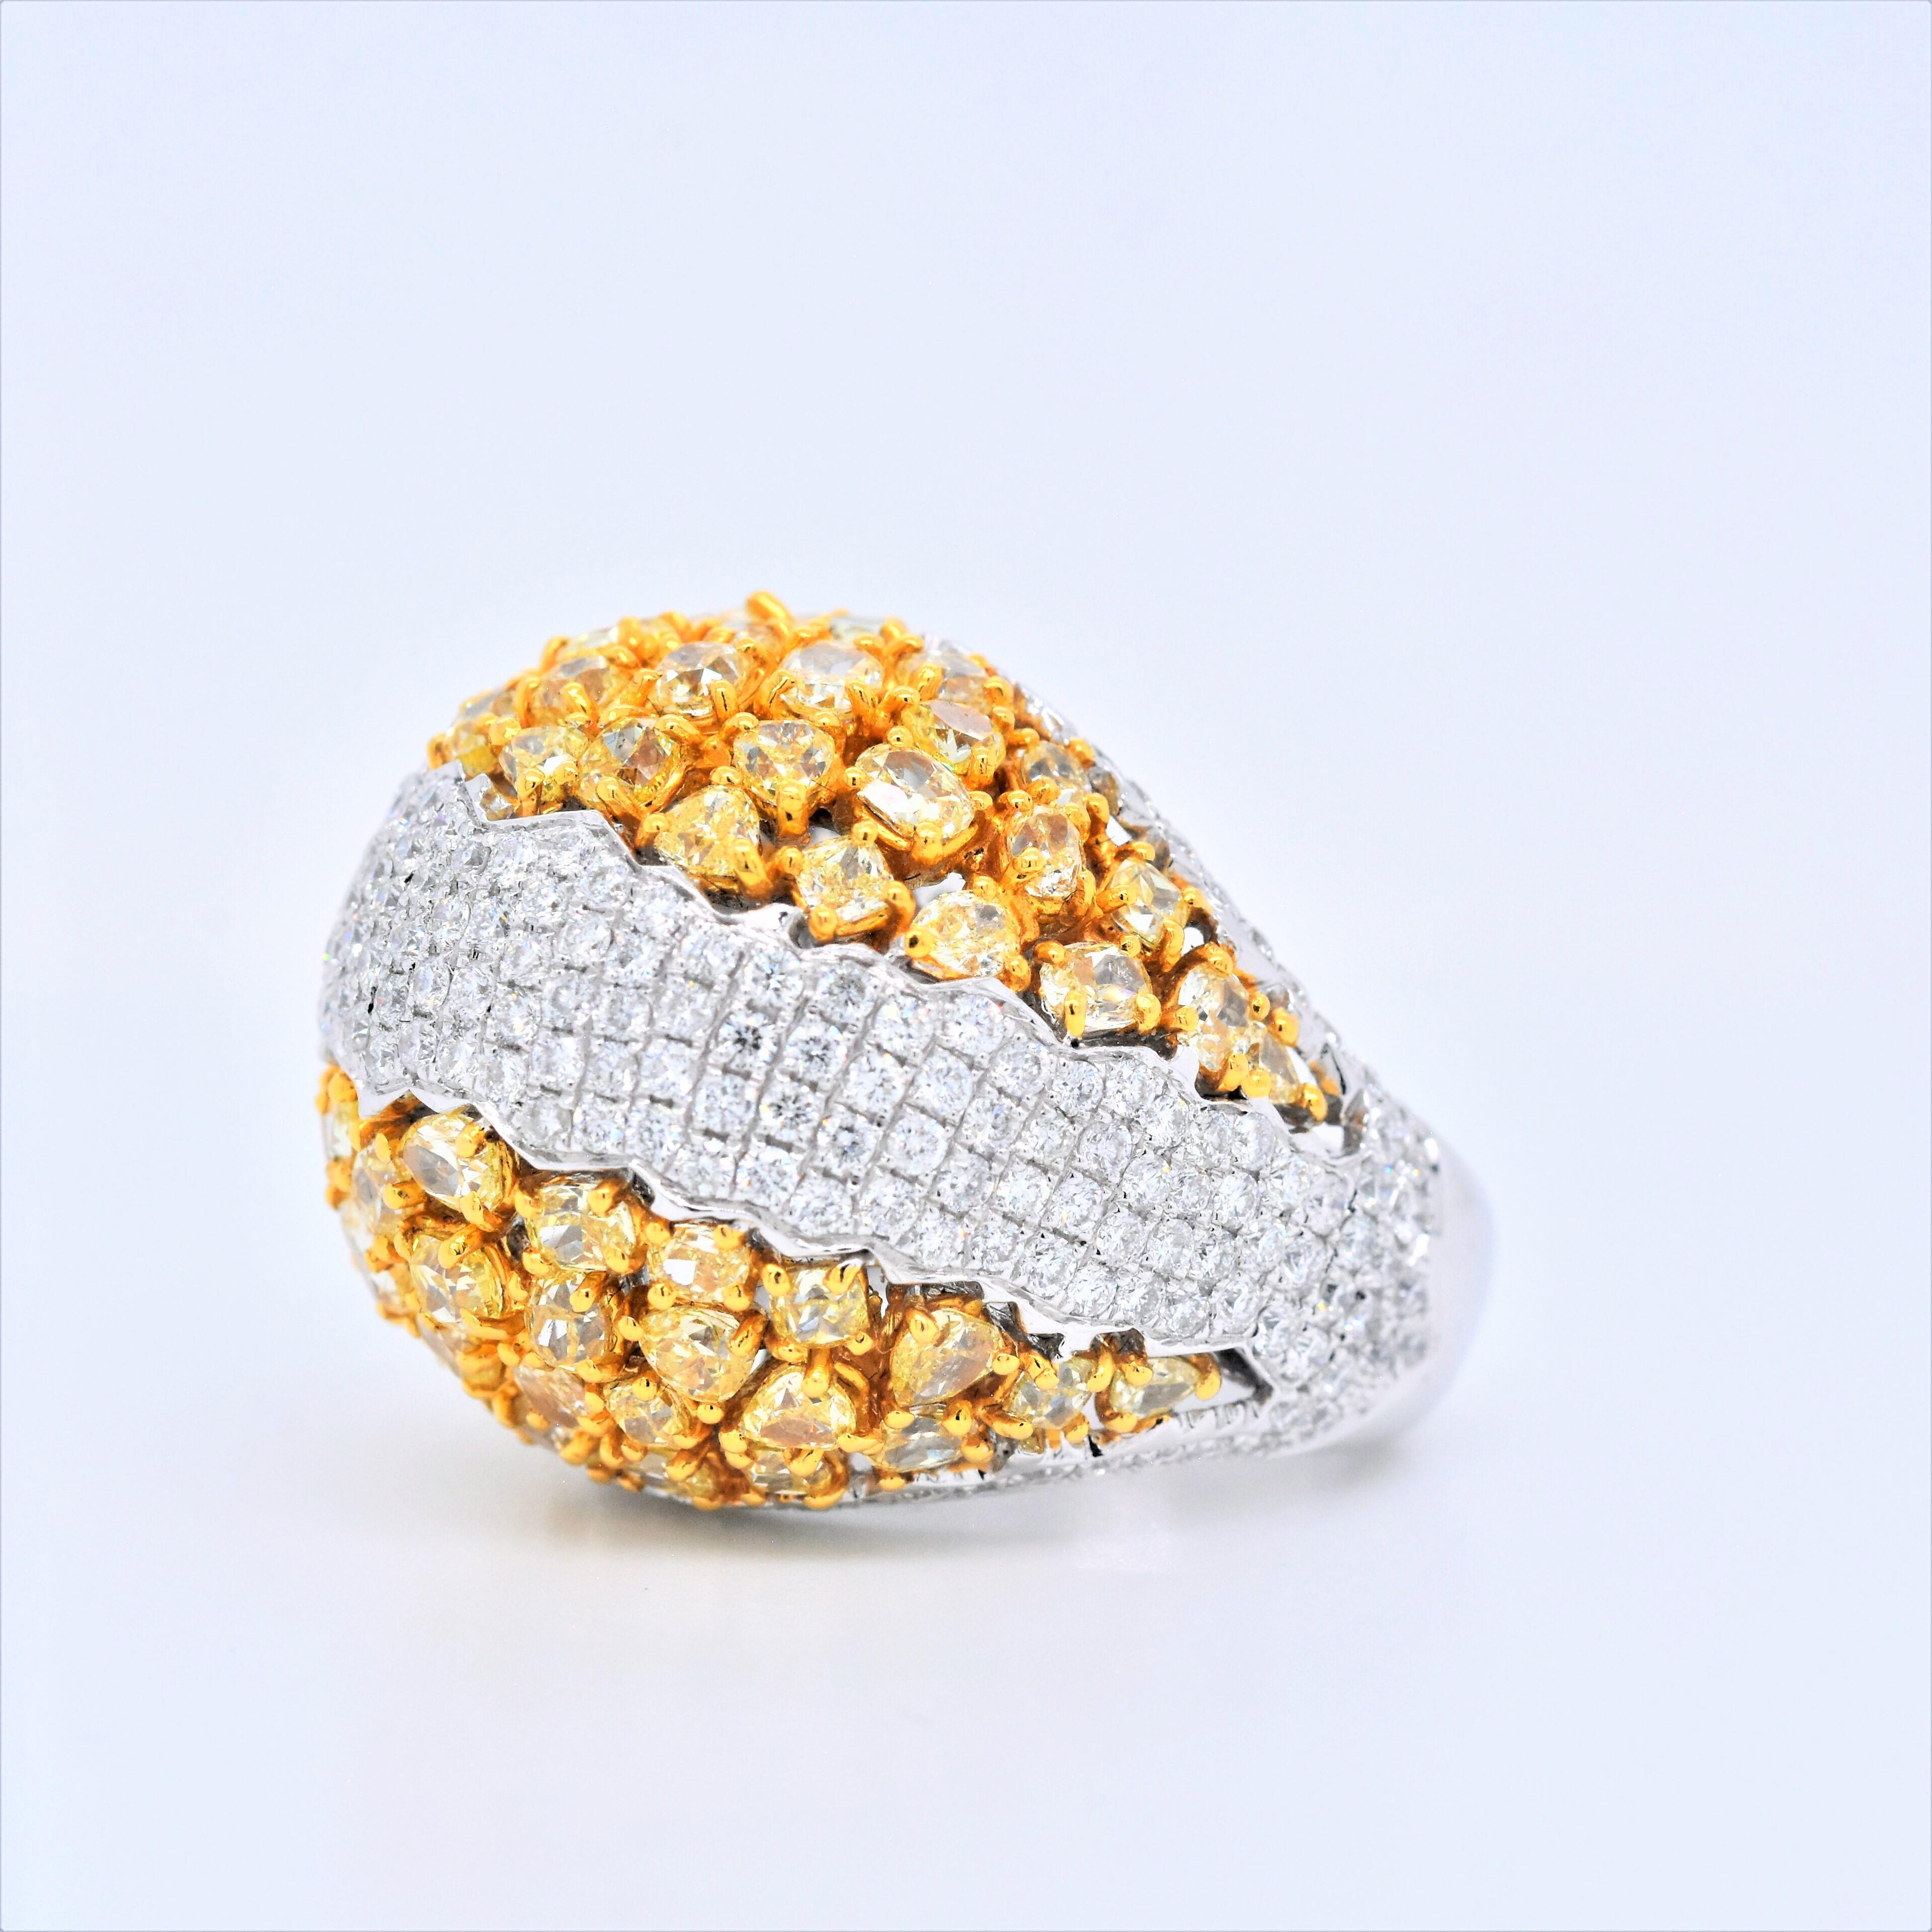 One of a Kind 8.87 Carat Natural Fancy Yellow Diamond Ring with Middle Part Wave of White Diamonds
Total Carat Weight: 8.87
Mixed Cut Natural Fancy Yellow Diamond: 6.19 Carats (total 70 stones)
Round White Diamonds: 2.68 Carats (total 233